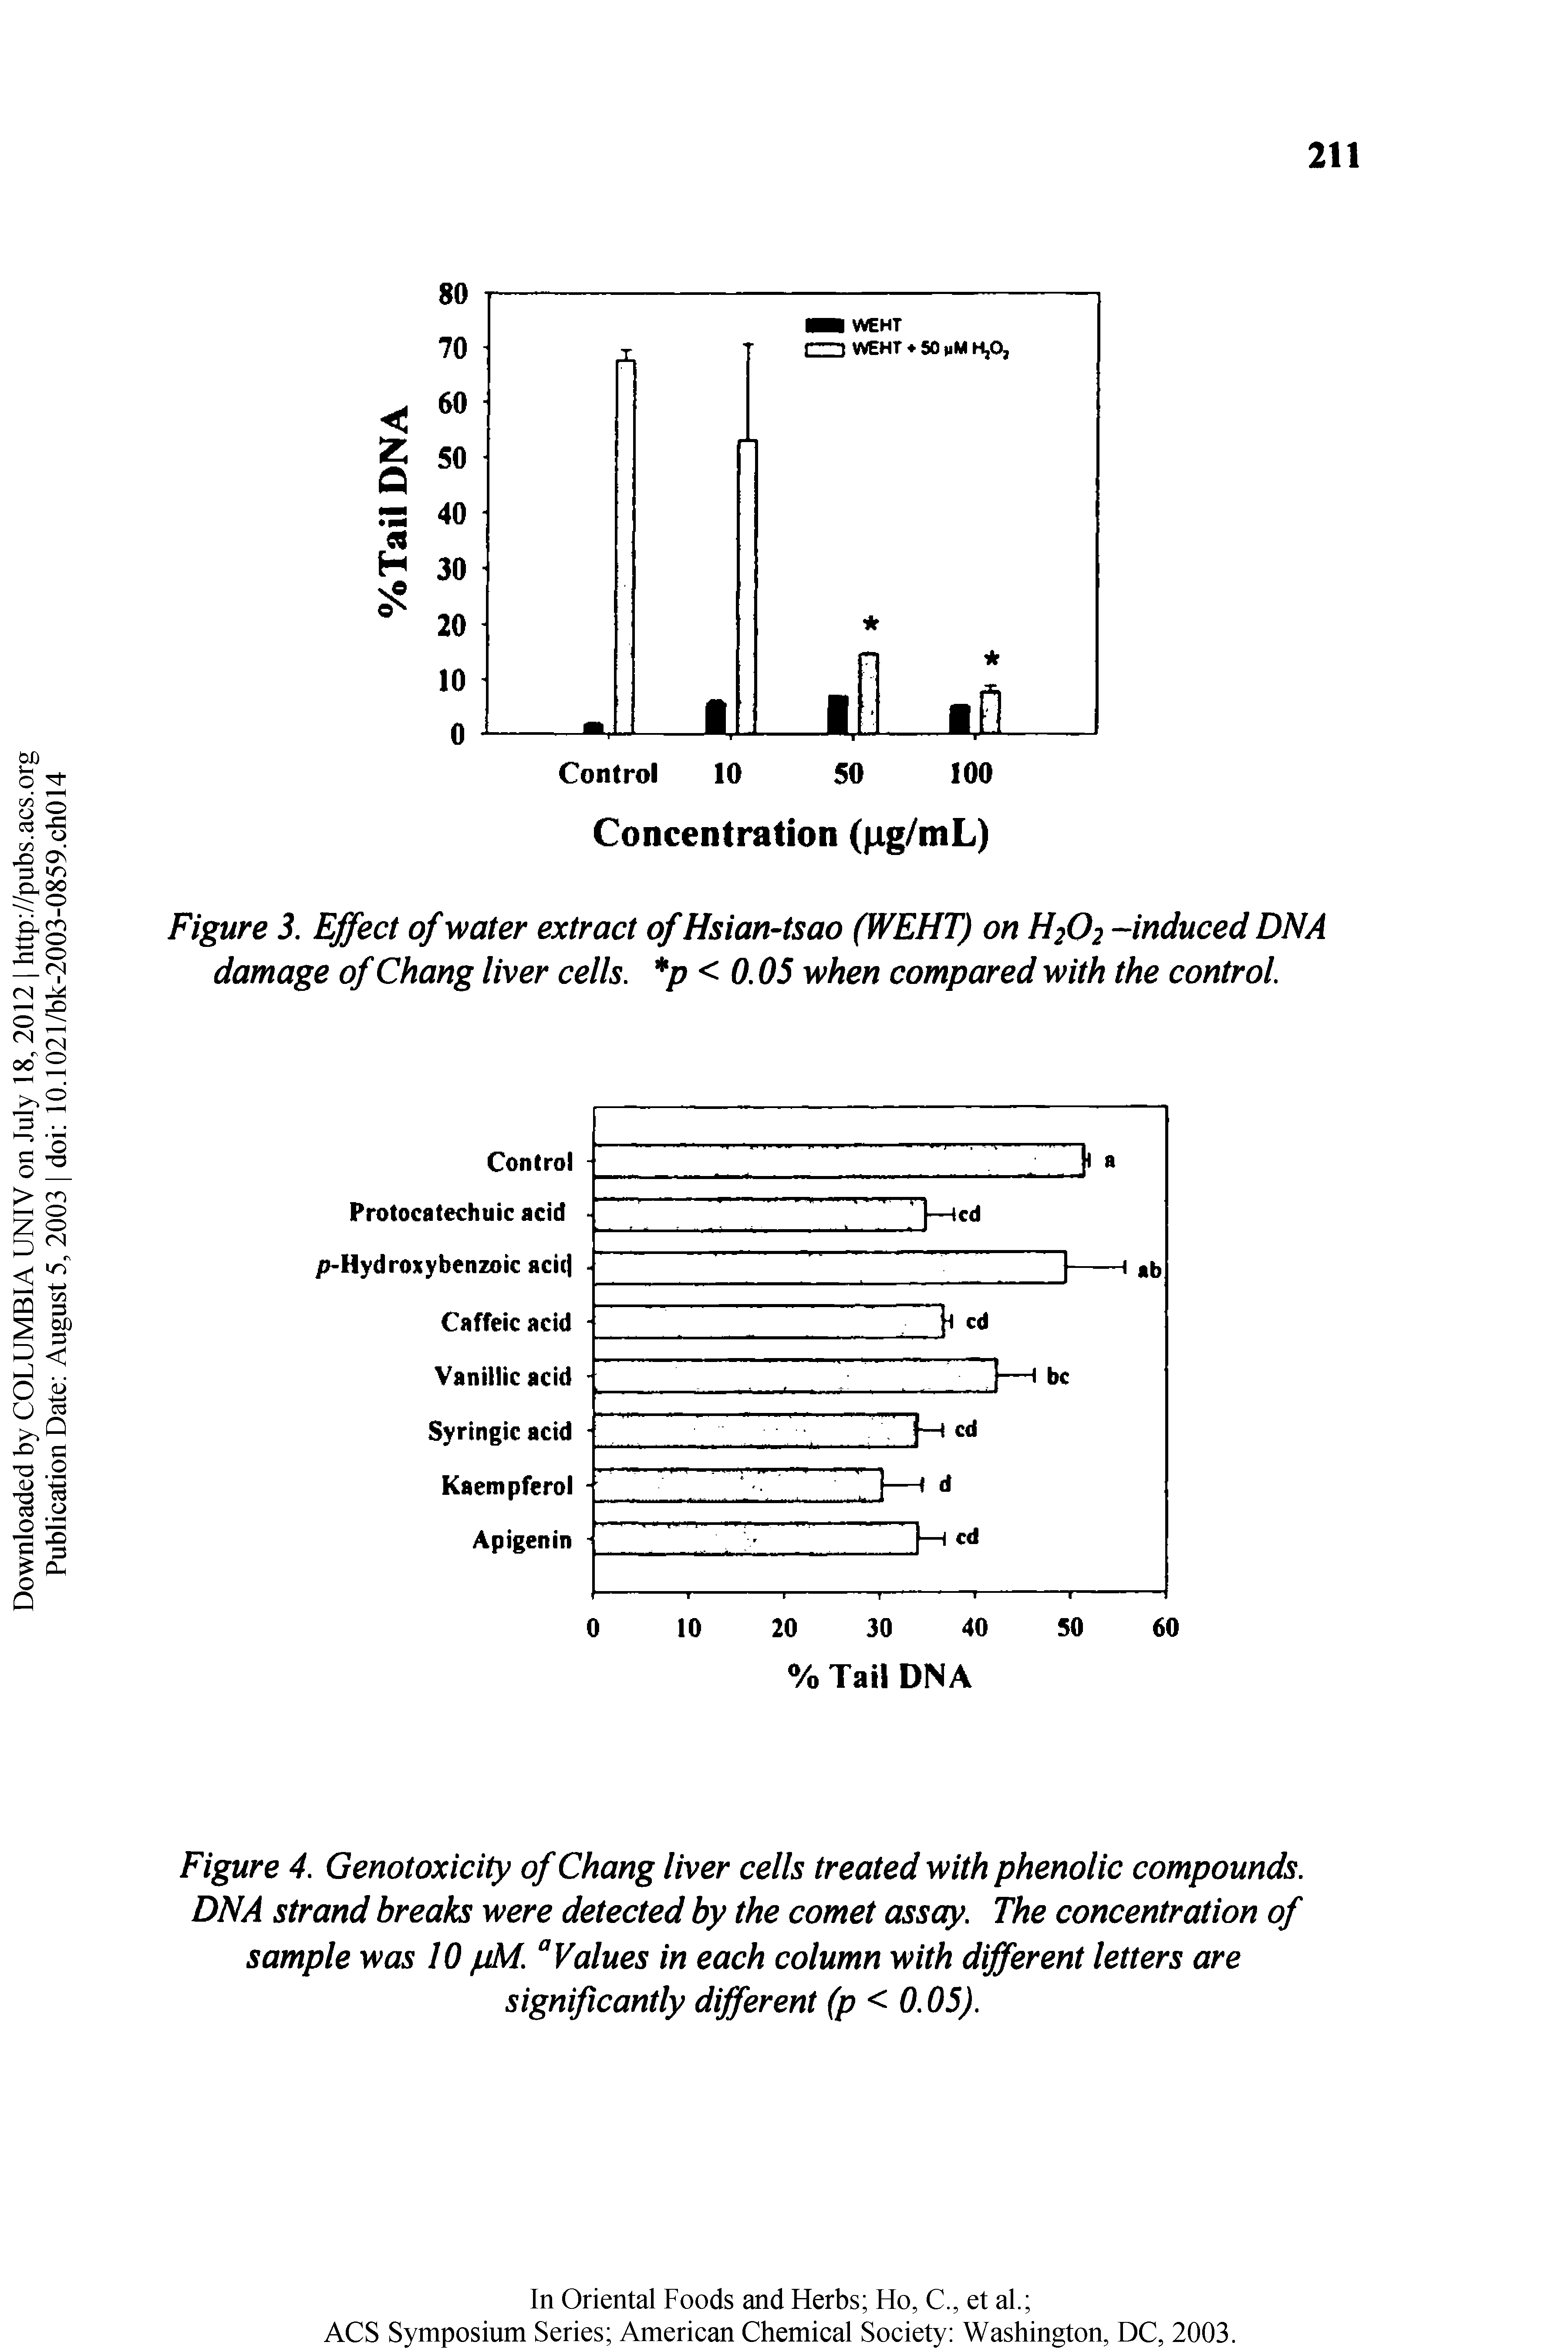 Figure 4. Genotoxicity of Chang liver cells treated with phenolic compounds. DNA strand breaks were detected by the comet assay. The concentration of sample was 10 pM. ° Values in each column with different letters are significantly different (p < 0.05).